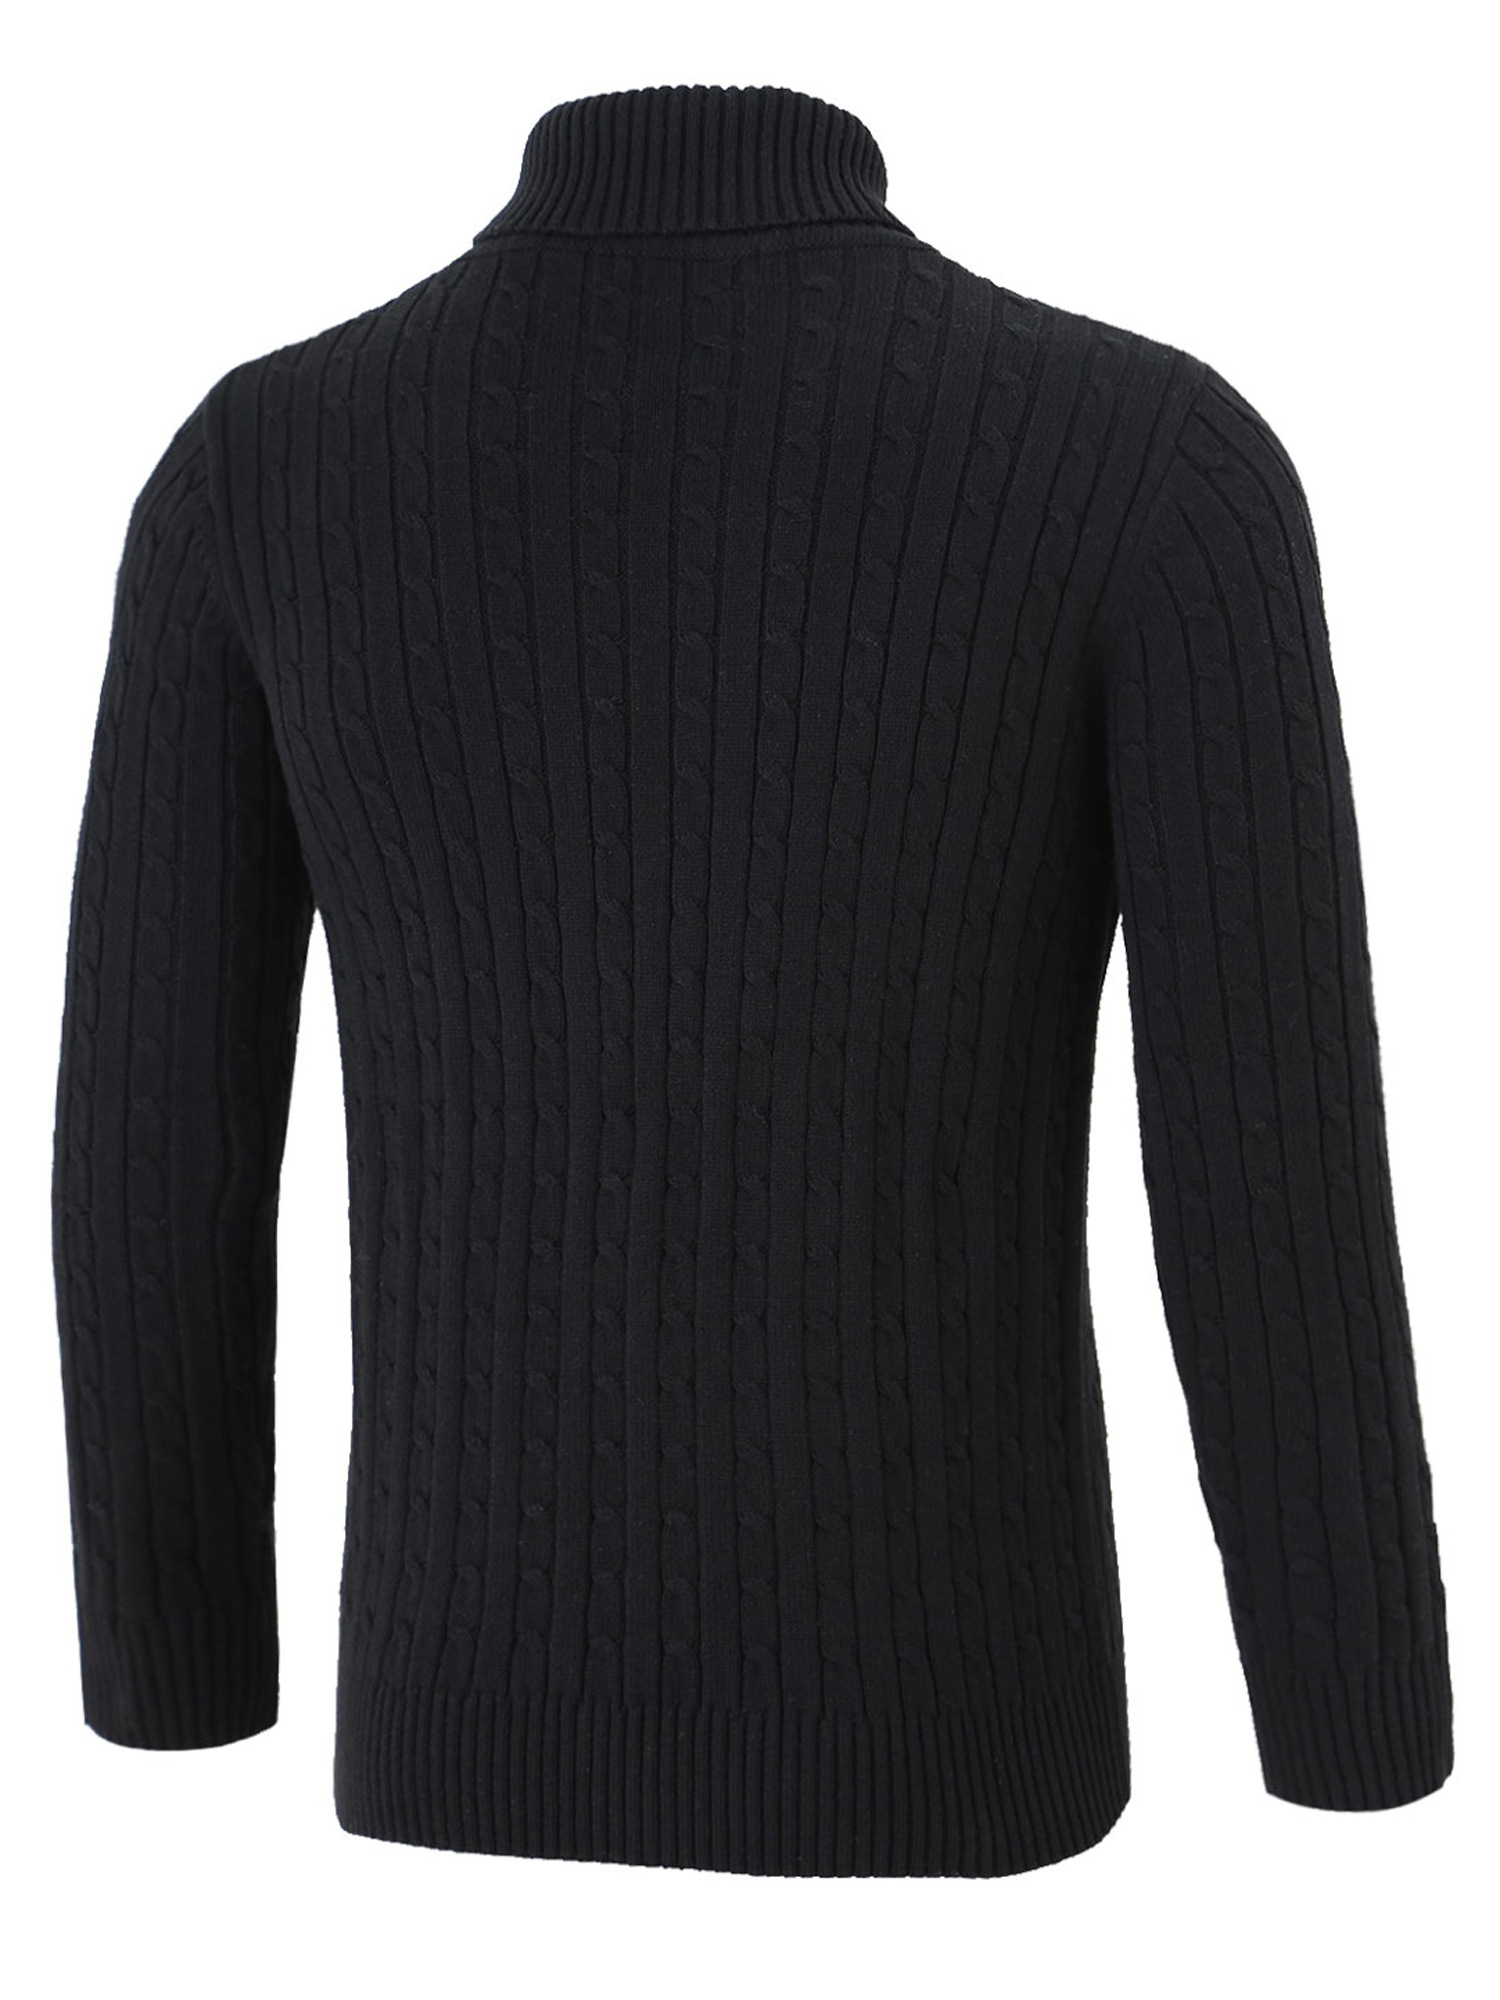 Men's Turtleneck Long Sleeves Pullover Cable Knit Sweater - image 3 of 7